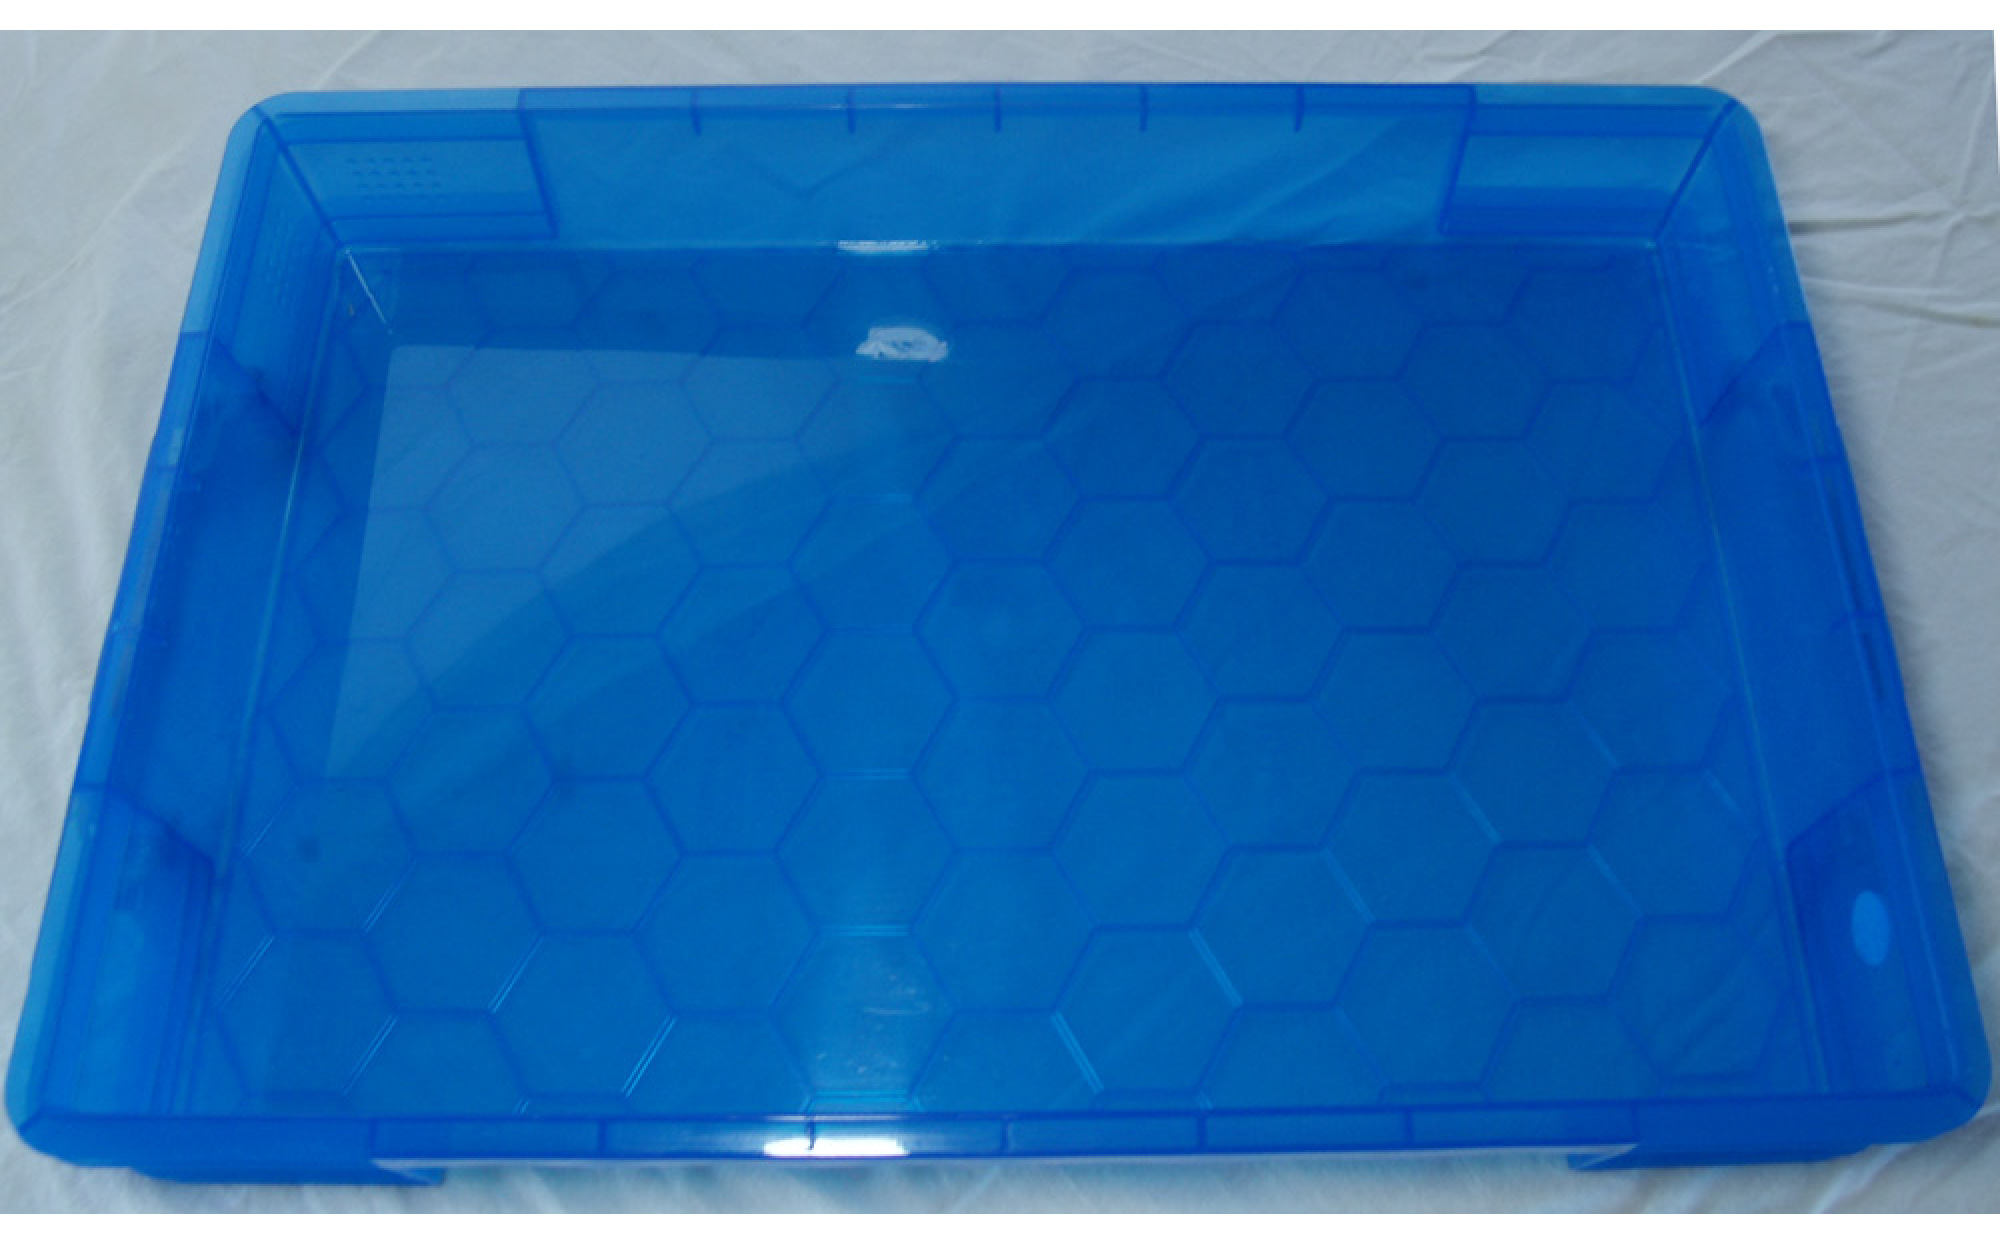 Medium Plastic Sand Tray with Lid – Sand Tray Therapy